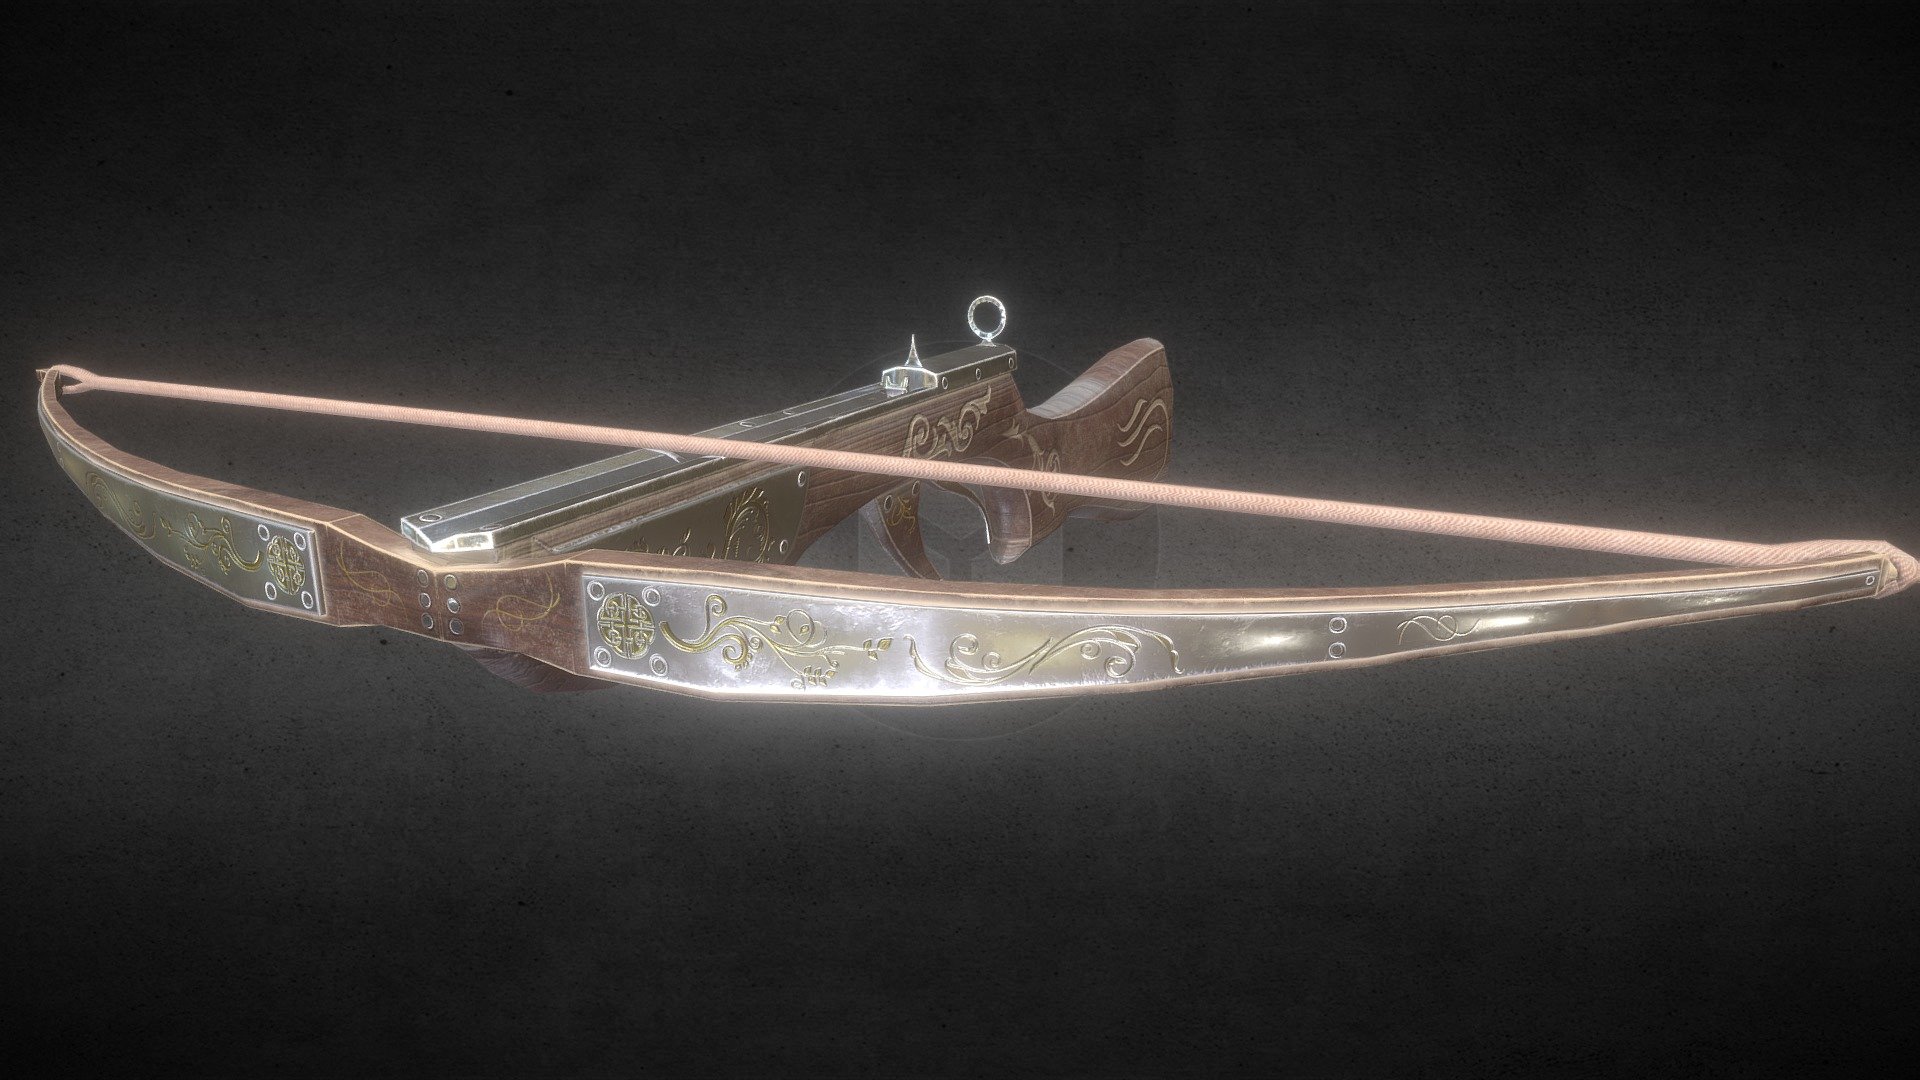 A quick medieval/fantasy crossbow made for fun and a bit of practice 3d model